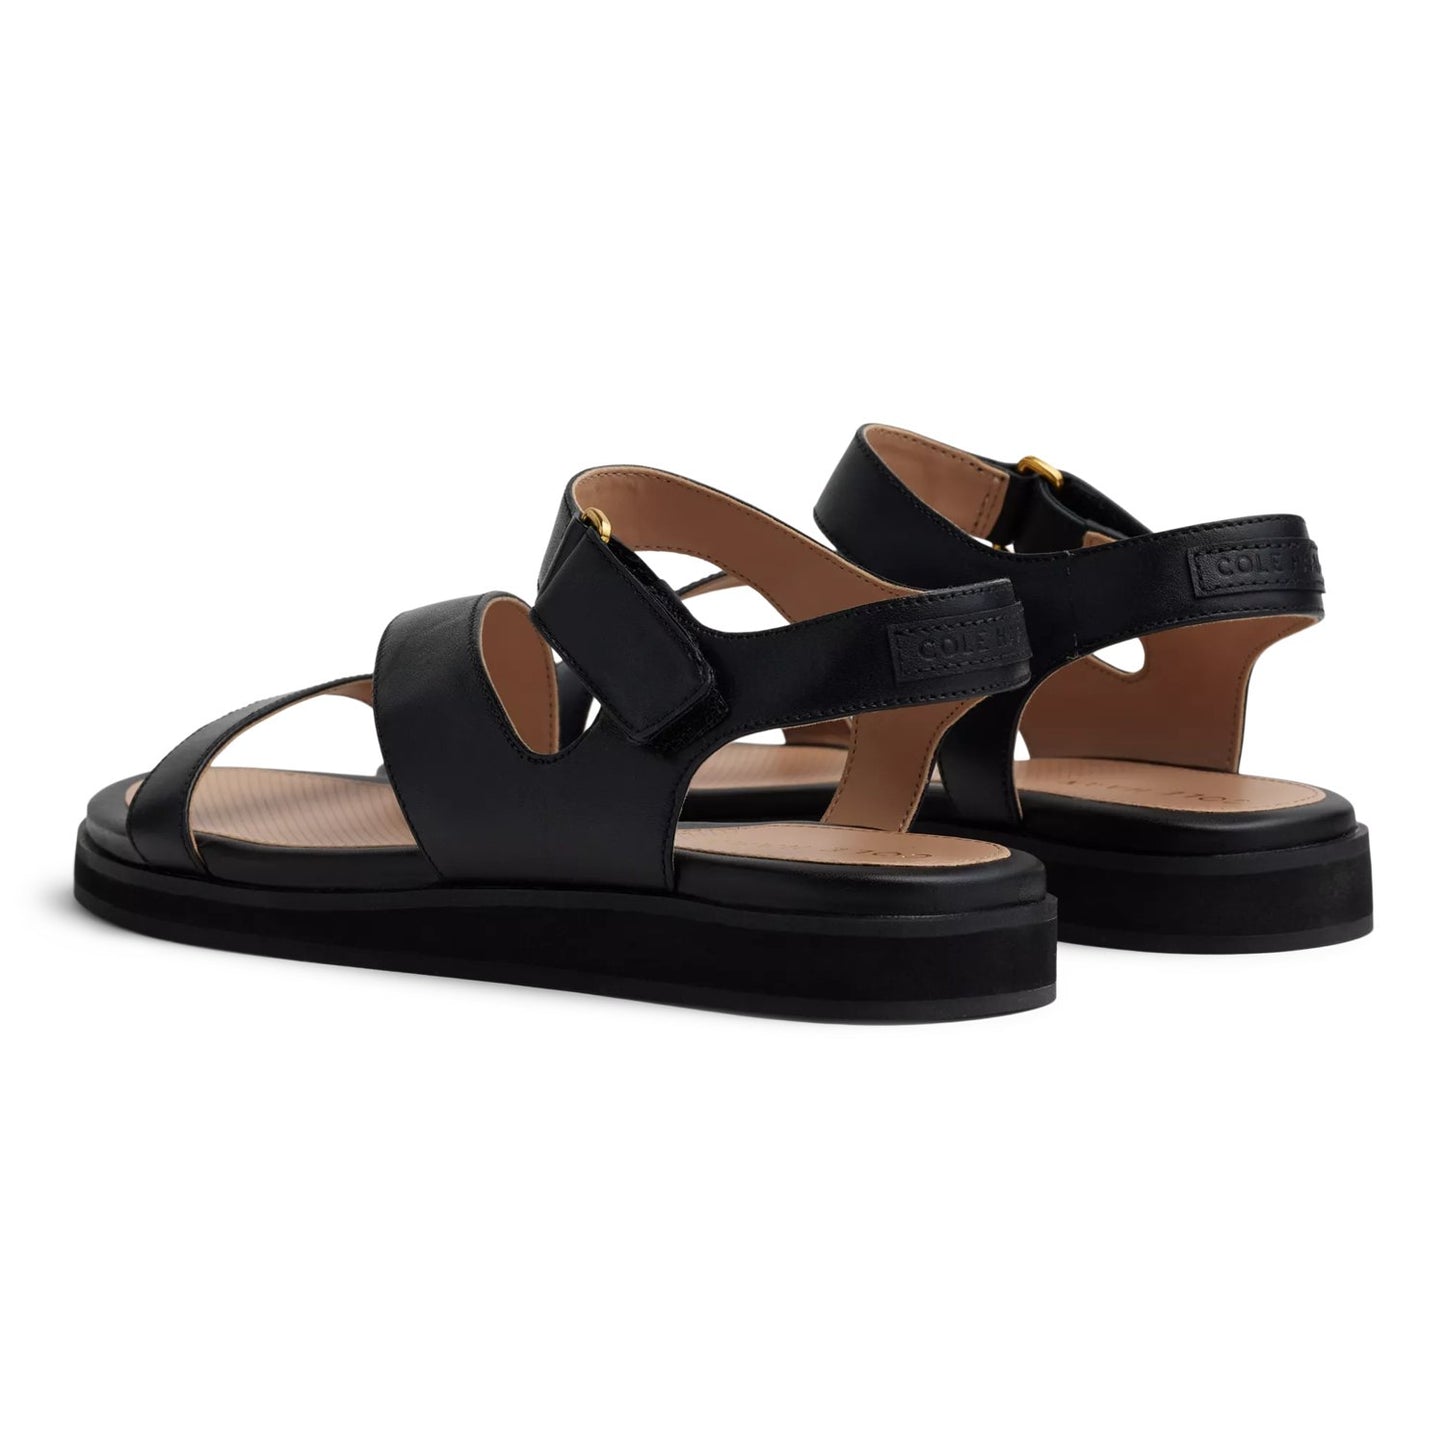 Mirabelle Leather Flat Sandals